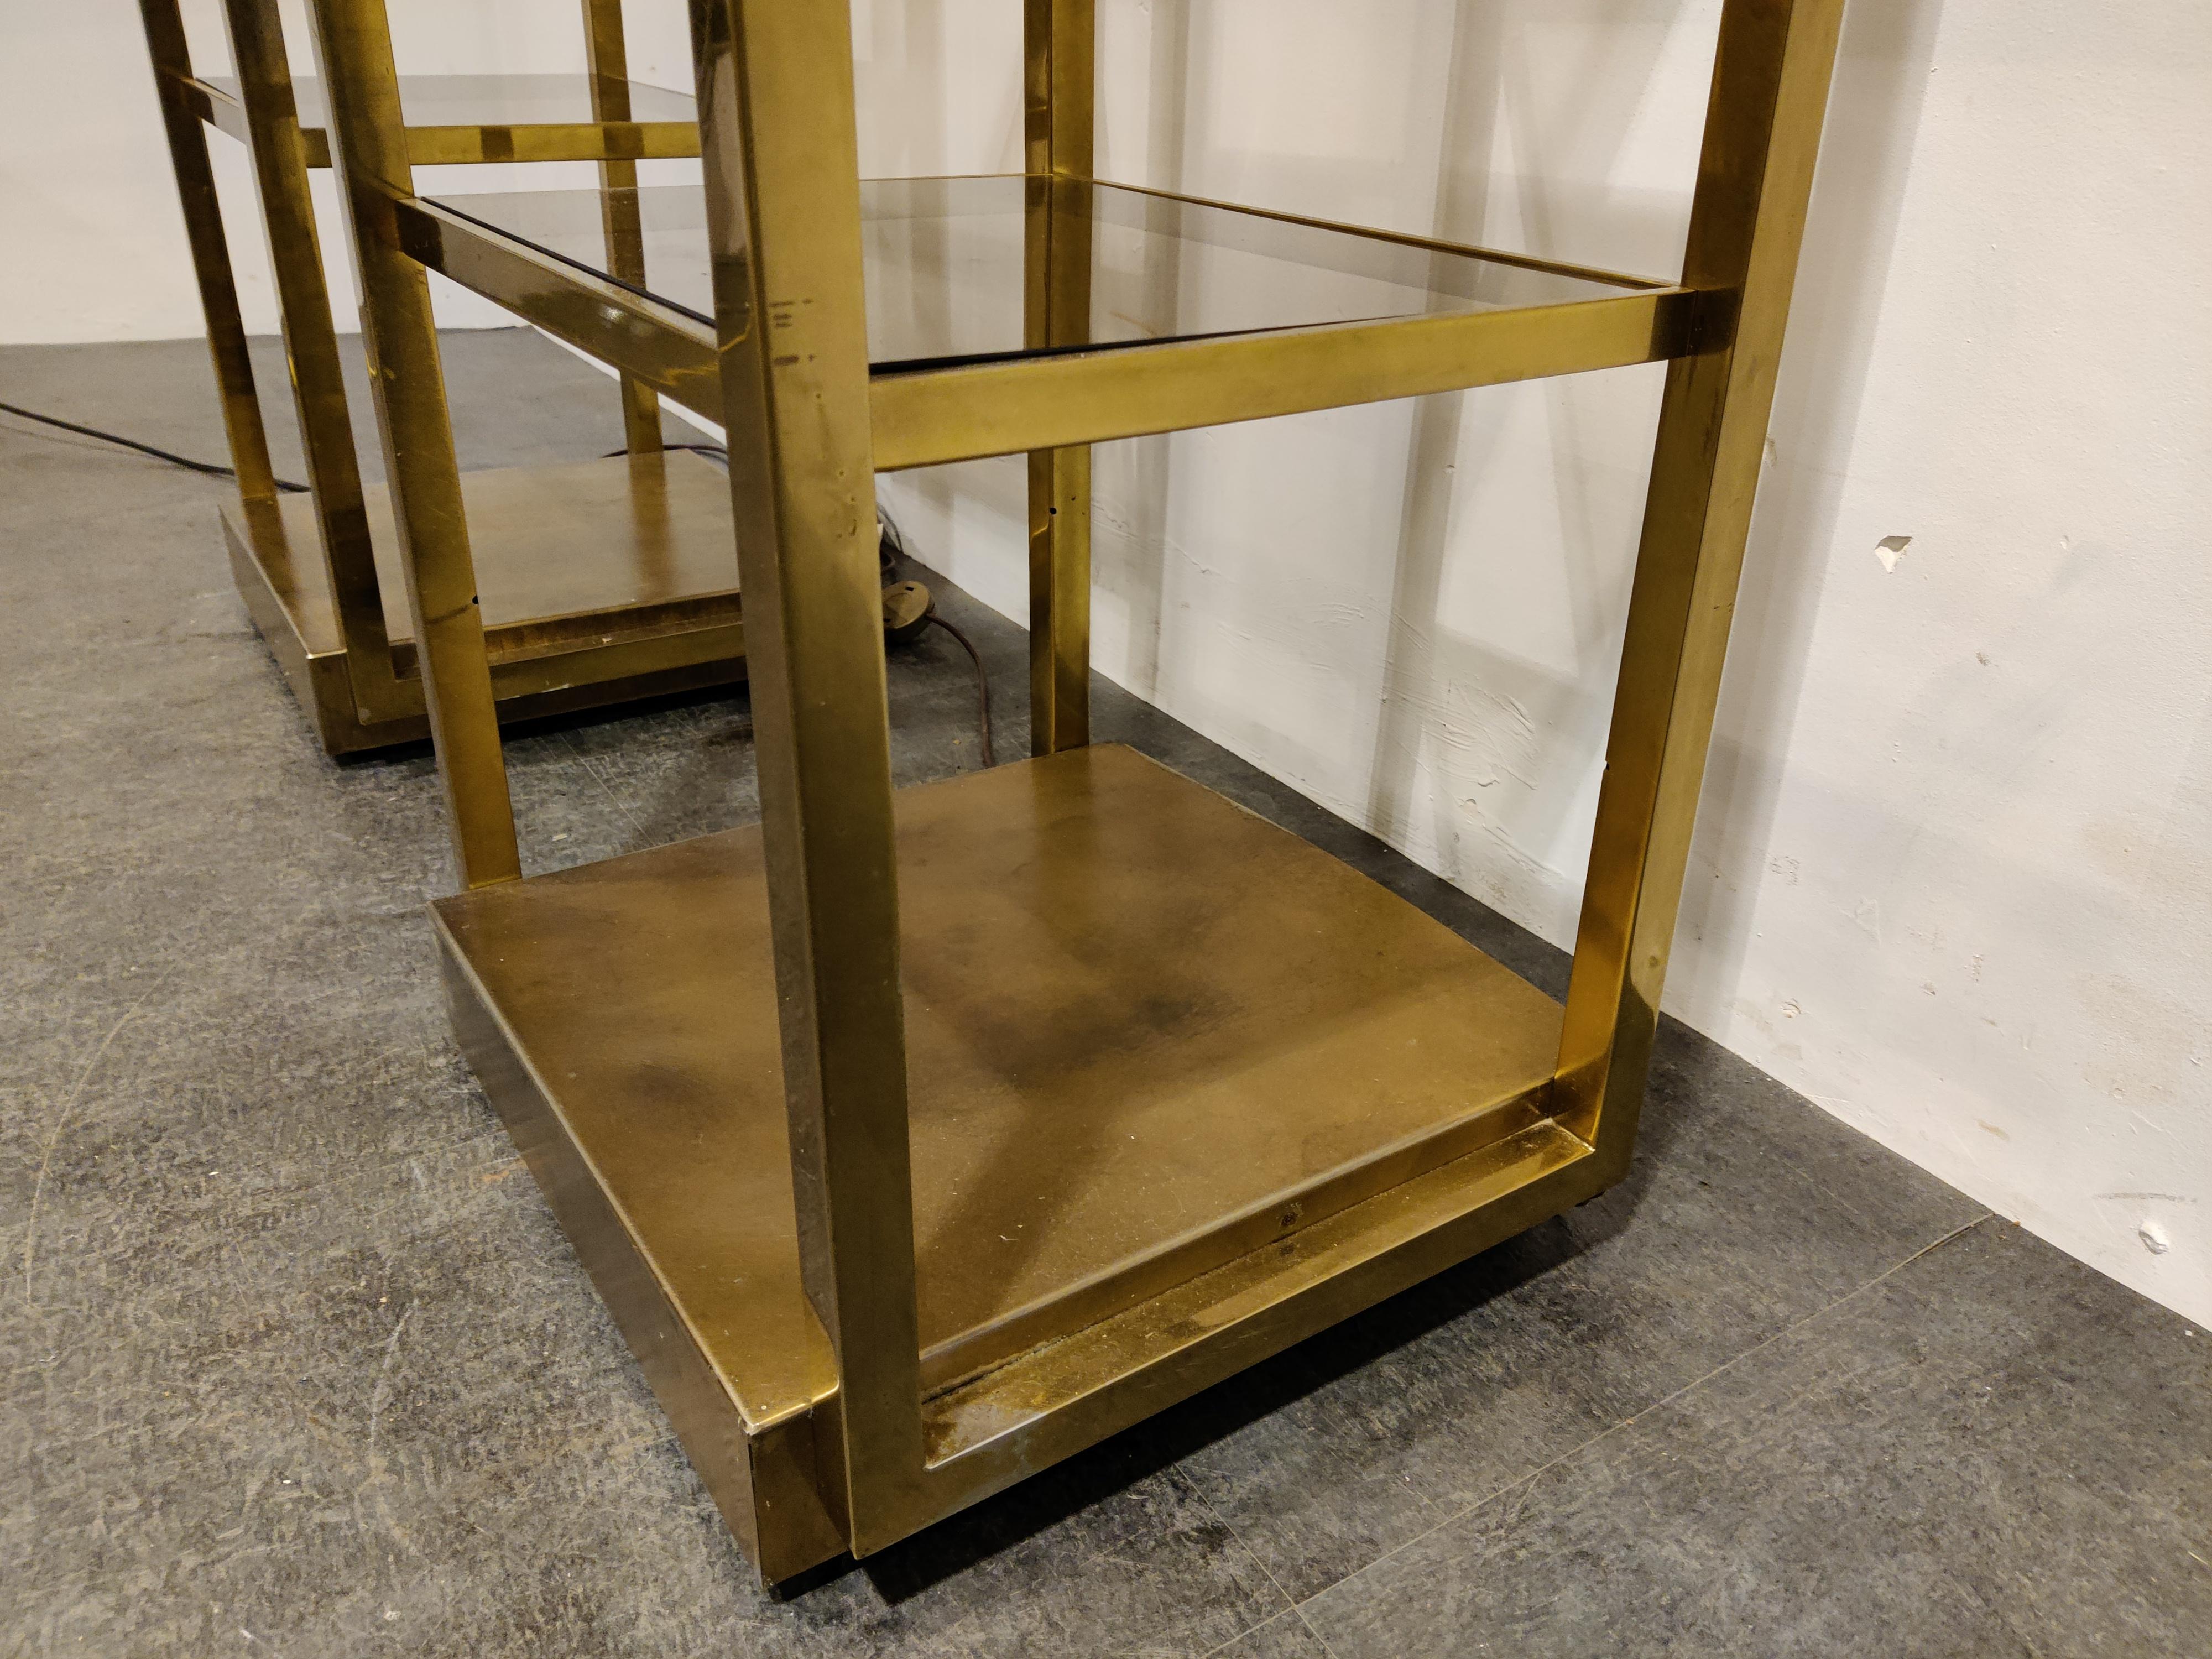 Pair of brass wall etageres with smoked glass shelves.

The etageres have a light at the top, showcasing whatever you have to display on the shelves.

Great presence as a pair.

Rare to find in full brass, usually made of gold leaf and